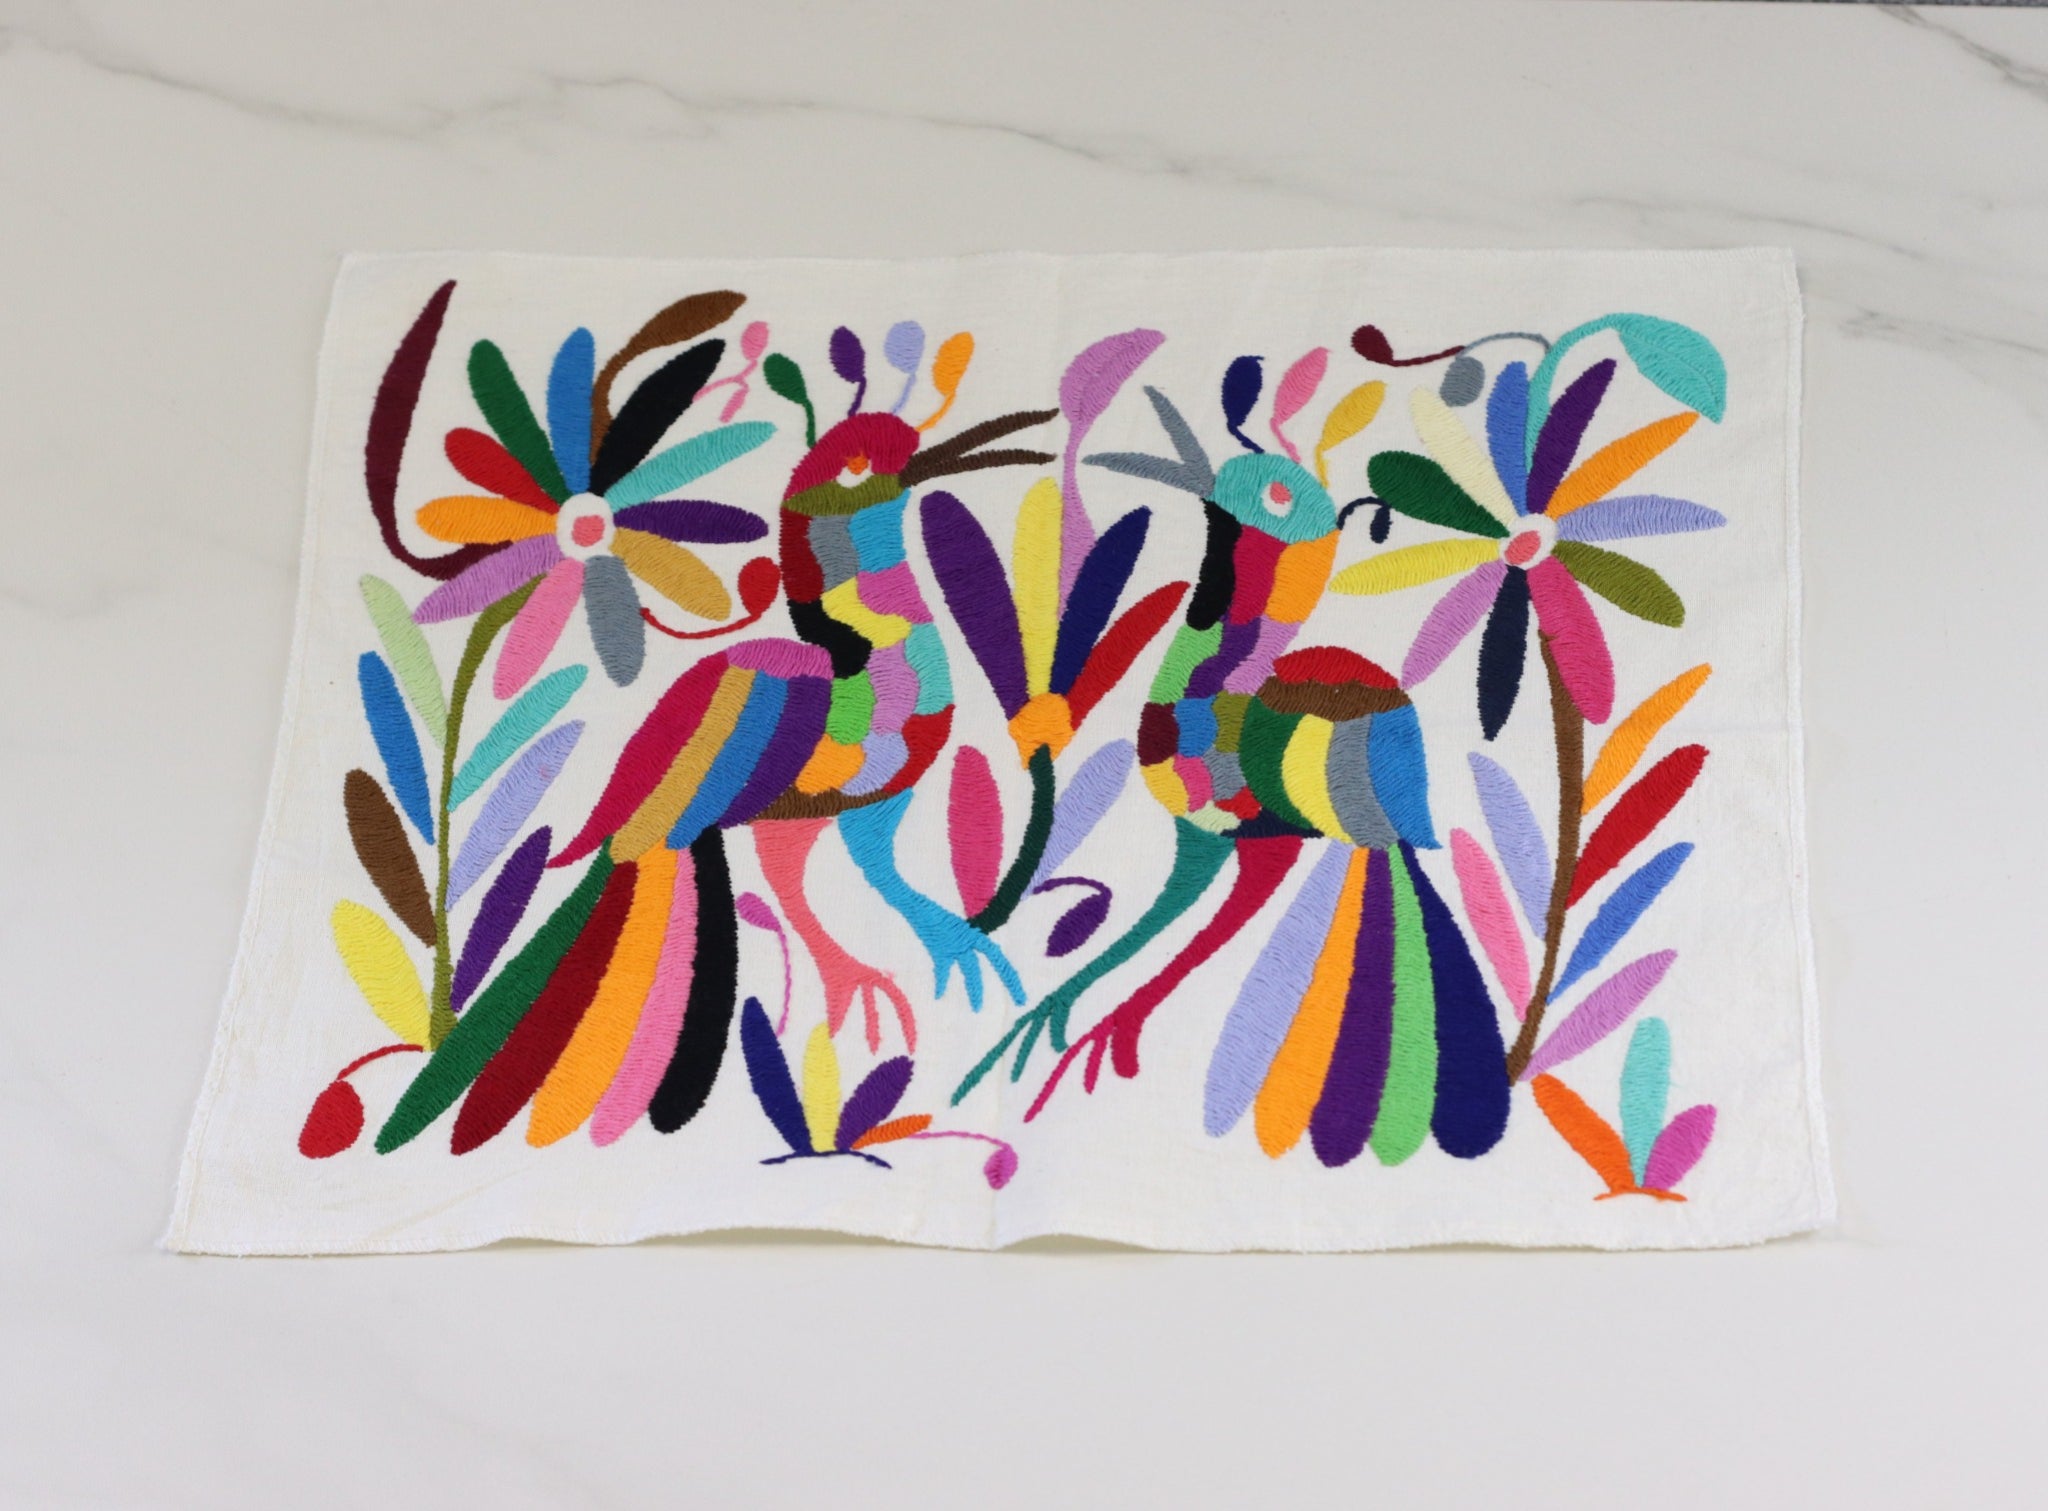 Otomi Tenango Placemat or Frameable Art Handmade with Embroidered Birds, Flowers, and Animals in Vibrant Colors. Handmade in Mexico. Ships from the USA. Buy now at www.felipeandgrace.com. 